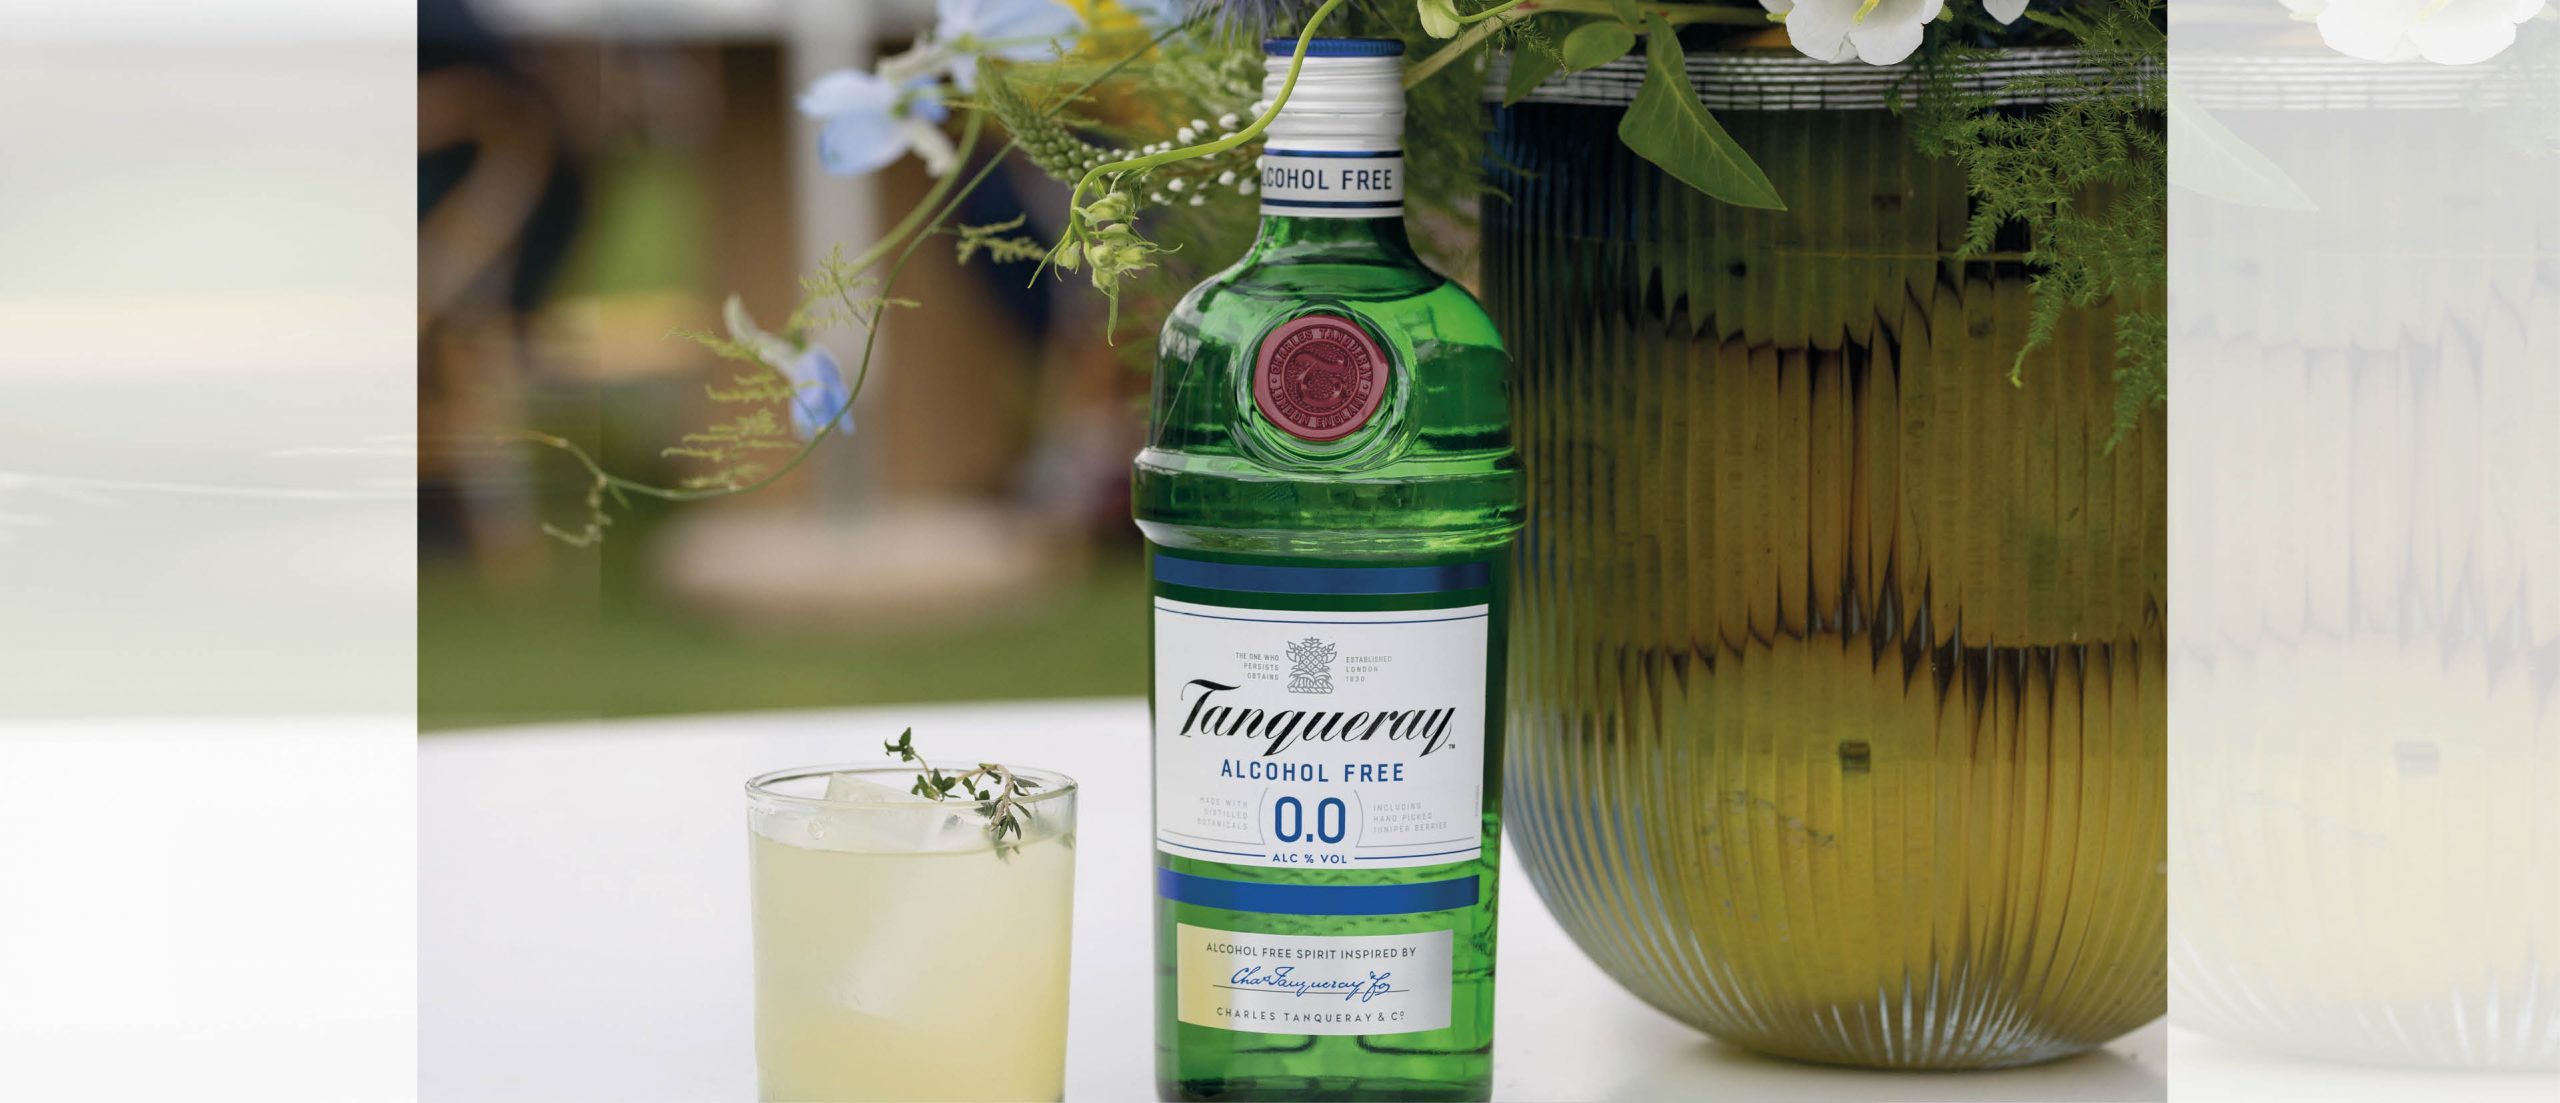 Worry-free, alcohol-free Tanqueray - It Get Magazine